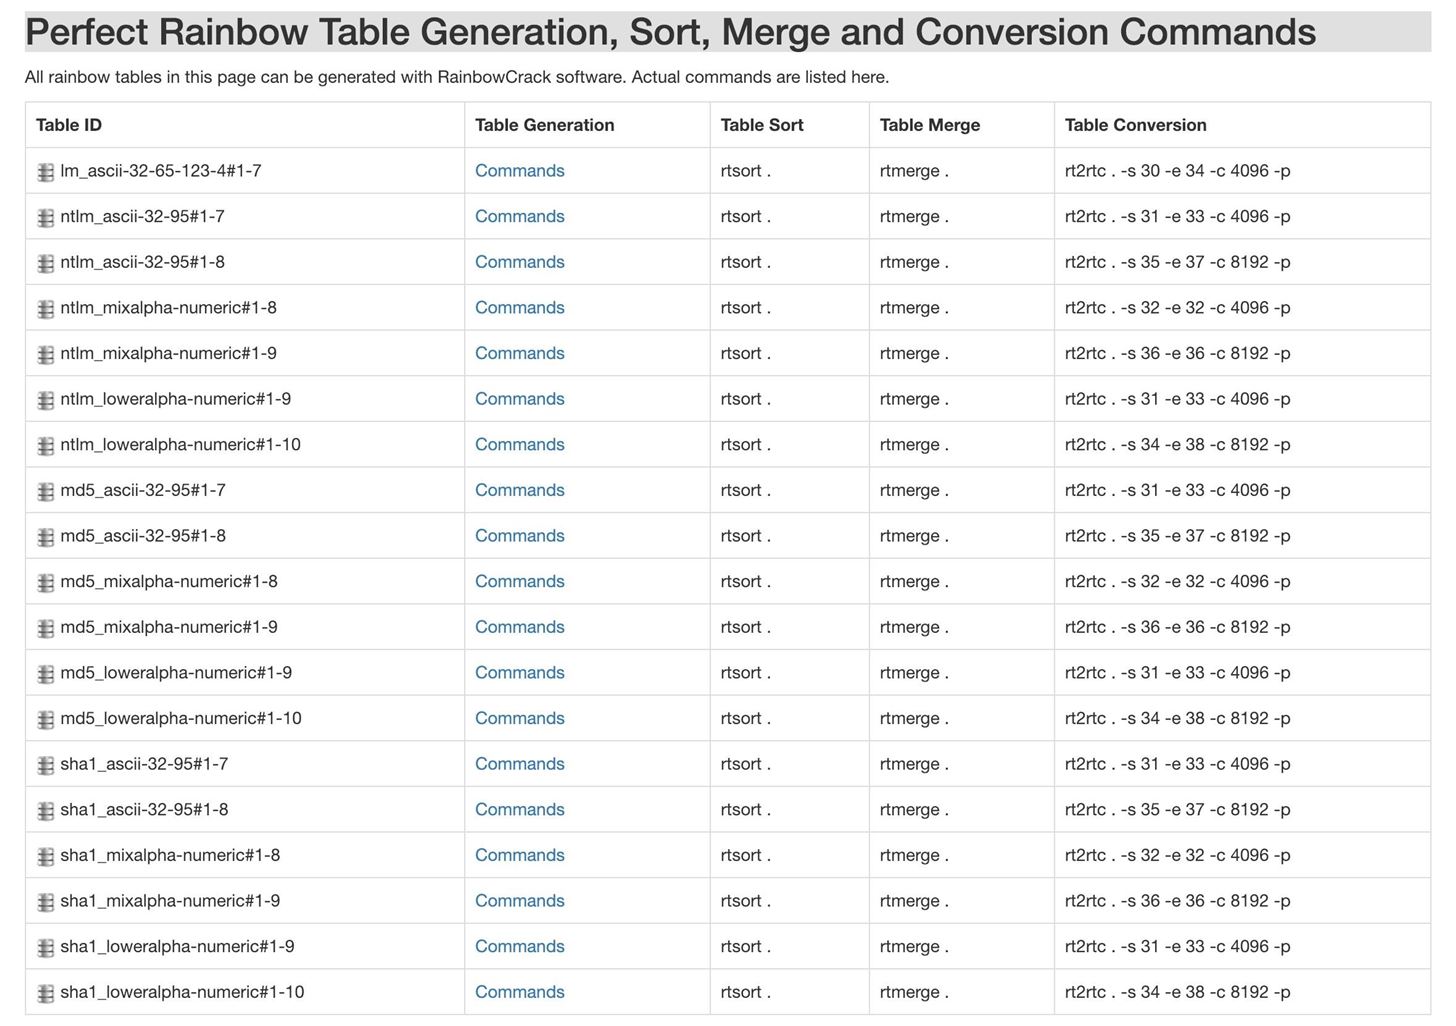 How to Create Rainbow Tables for Hashing Algorithms Like MD5, SHA1 & NTLM